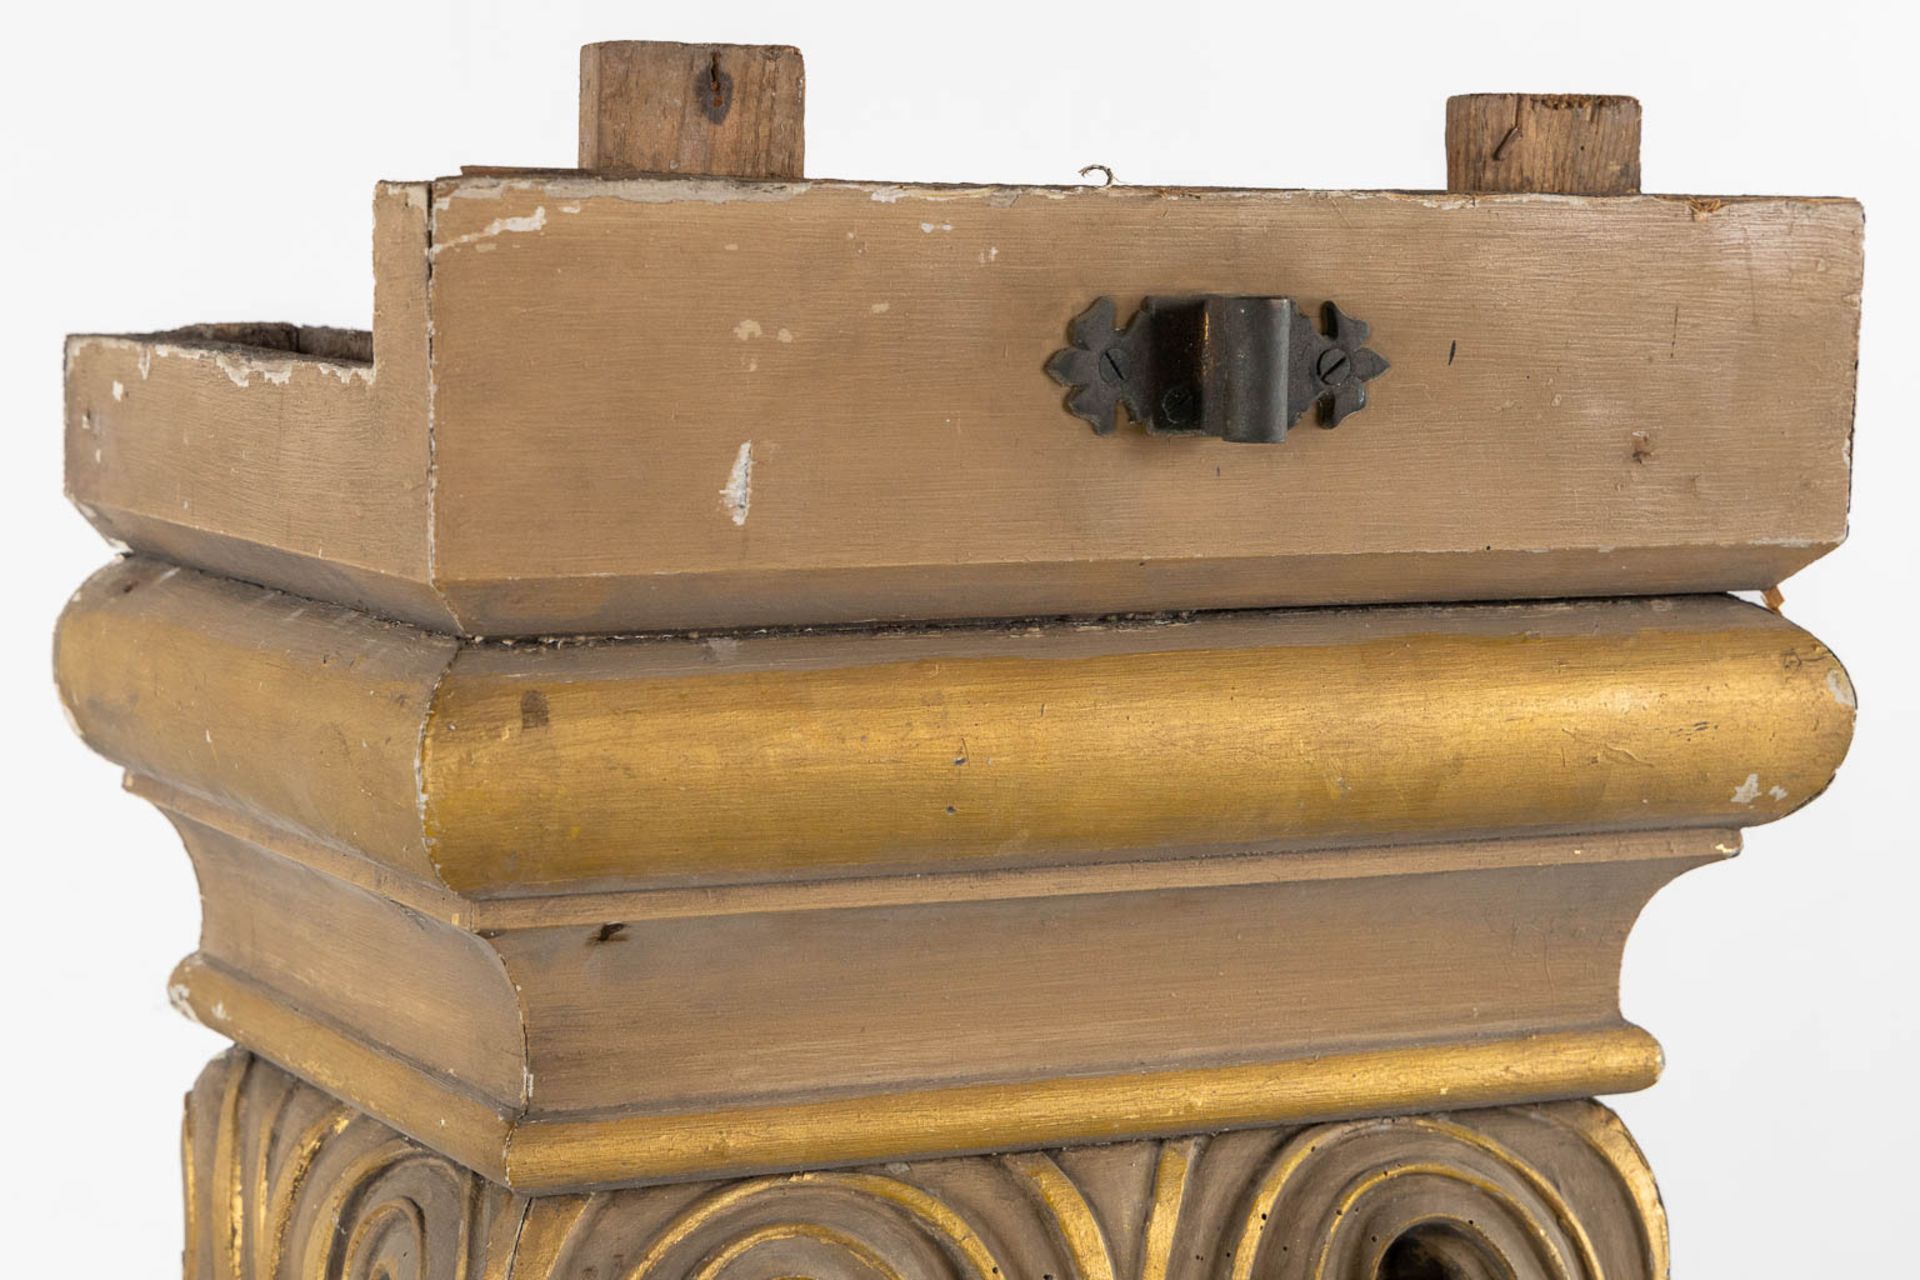 A richly gilt and woodsculptured pedestal with an ionic capitel. Circa 1900. (L:44 x W:60 x H:130 cm - Image 9 of 14